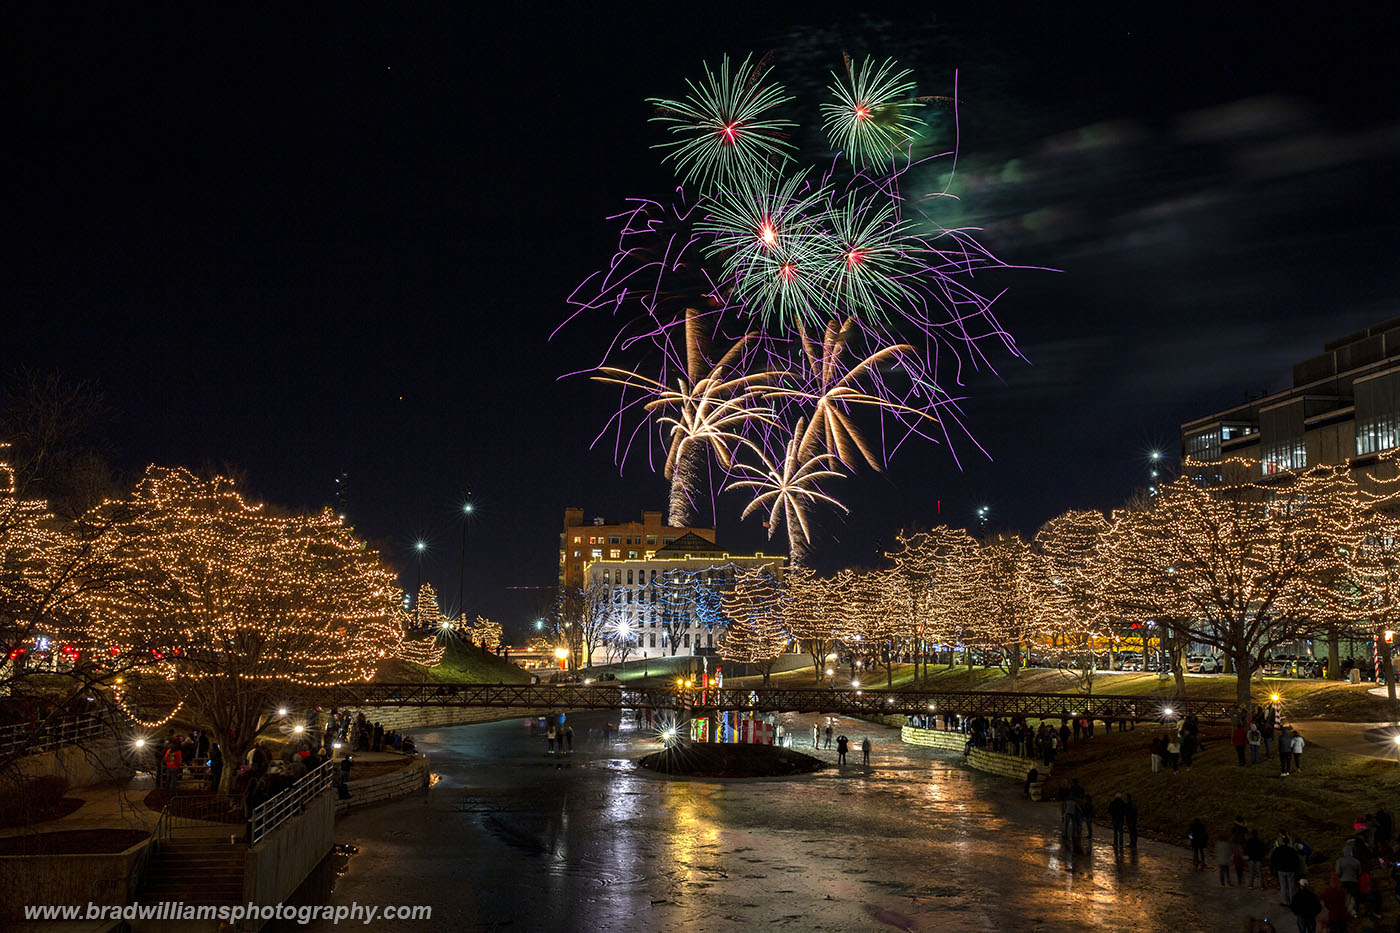 A beautiful evening for the 2018 fireworks in the Gene Leahy Mall, Omaha, Nebraska.  The fireworks were actually shot off in...